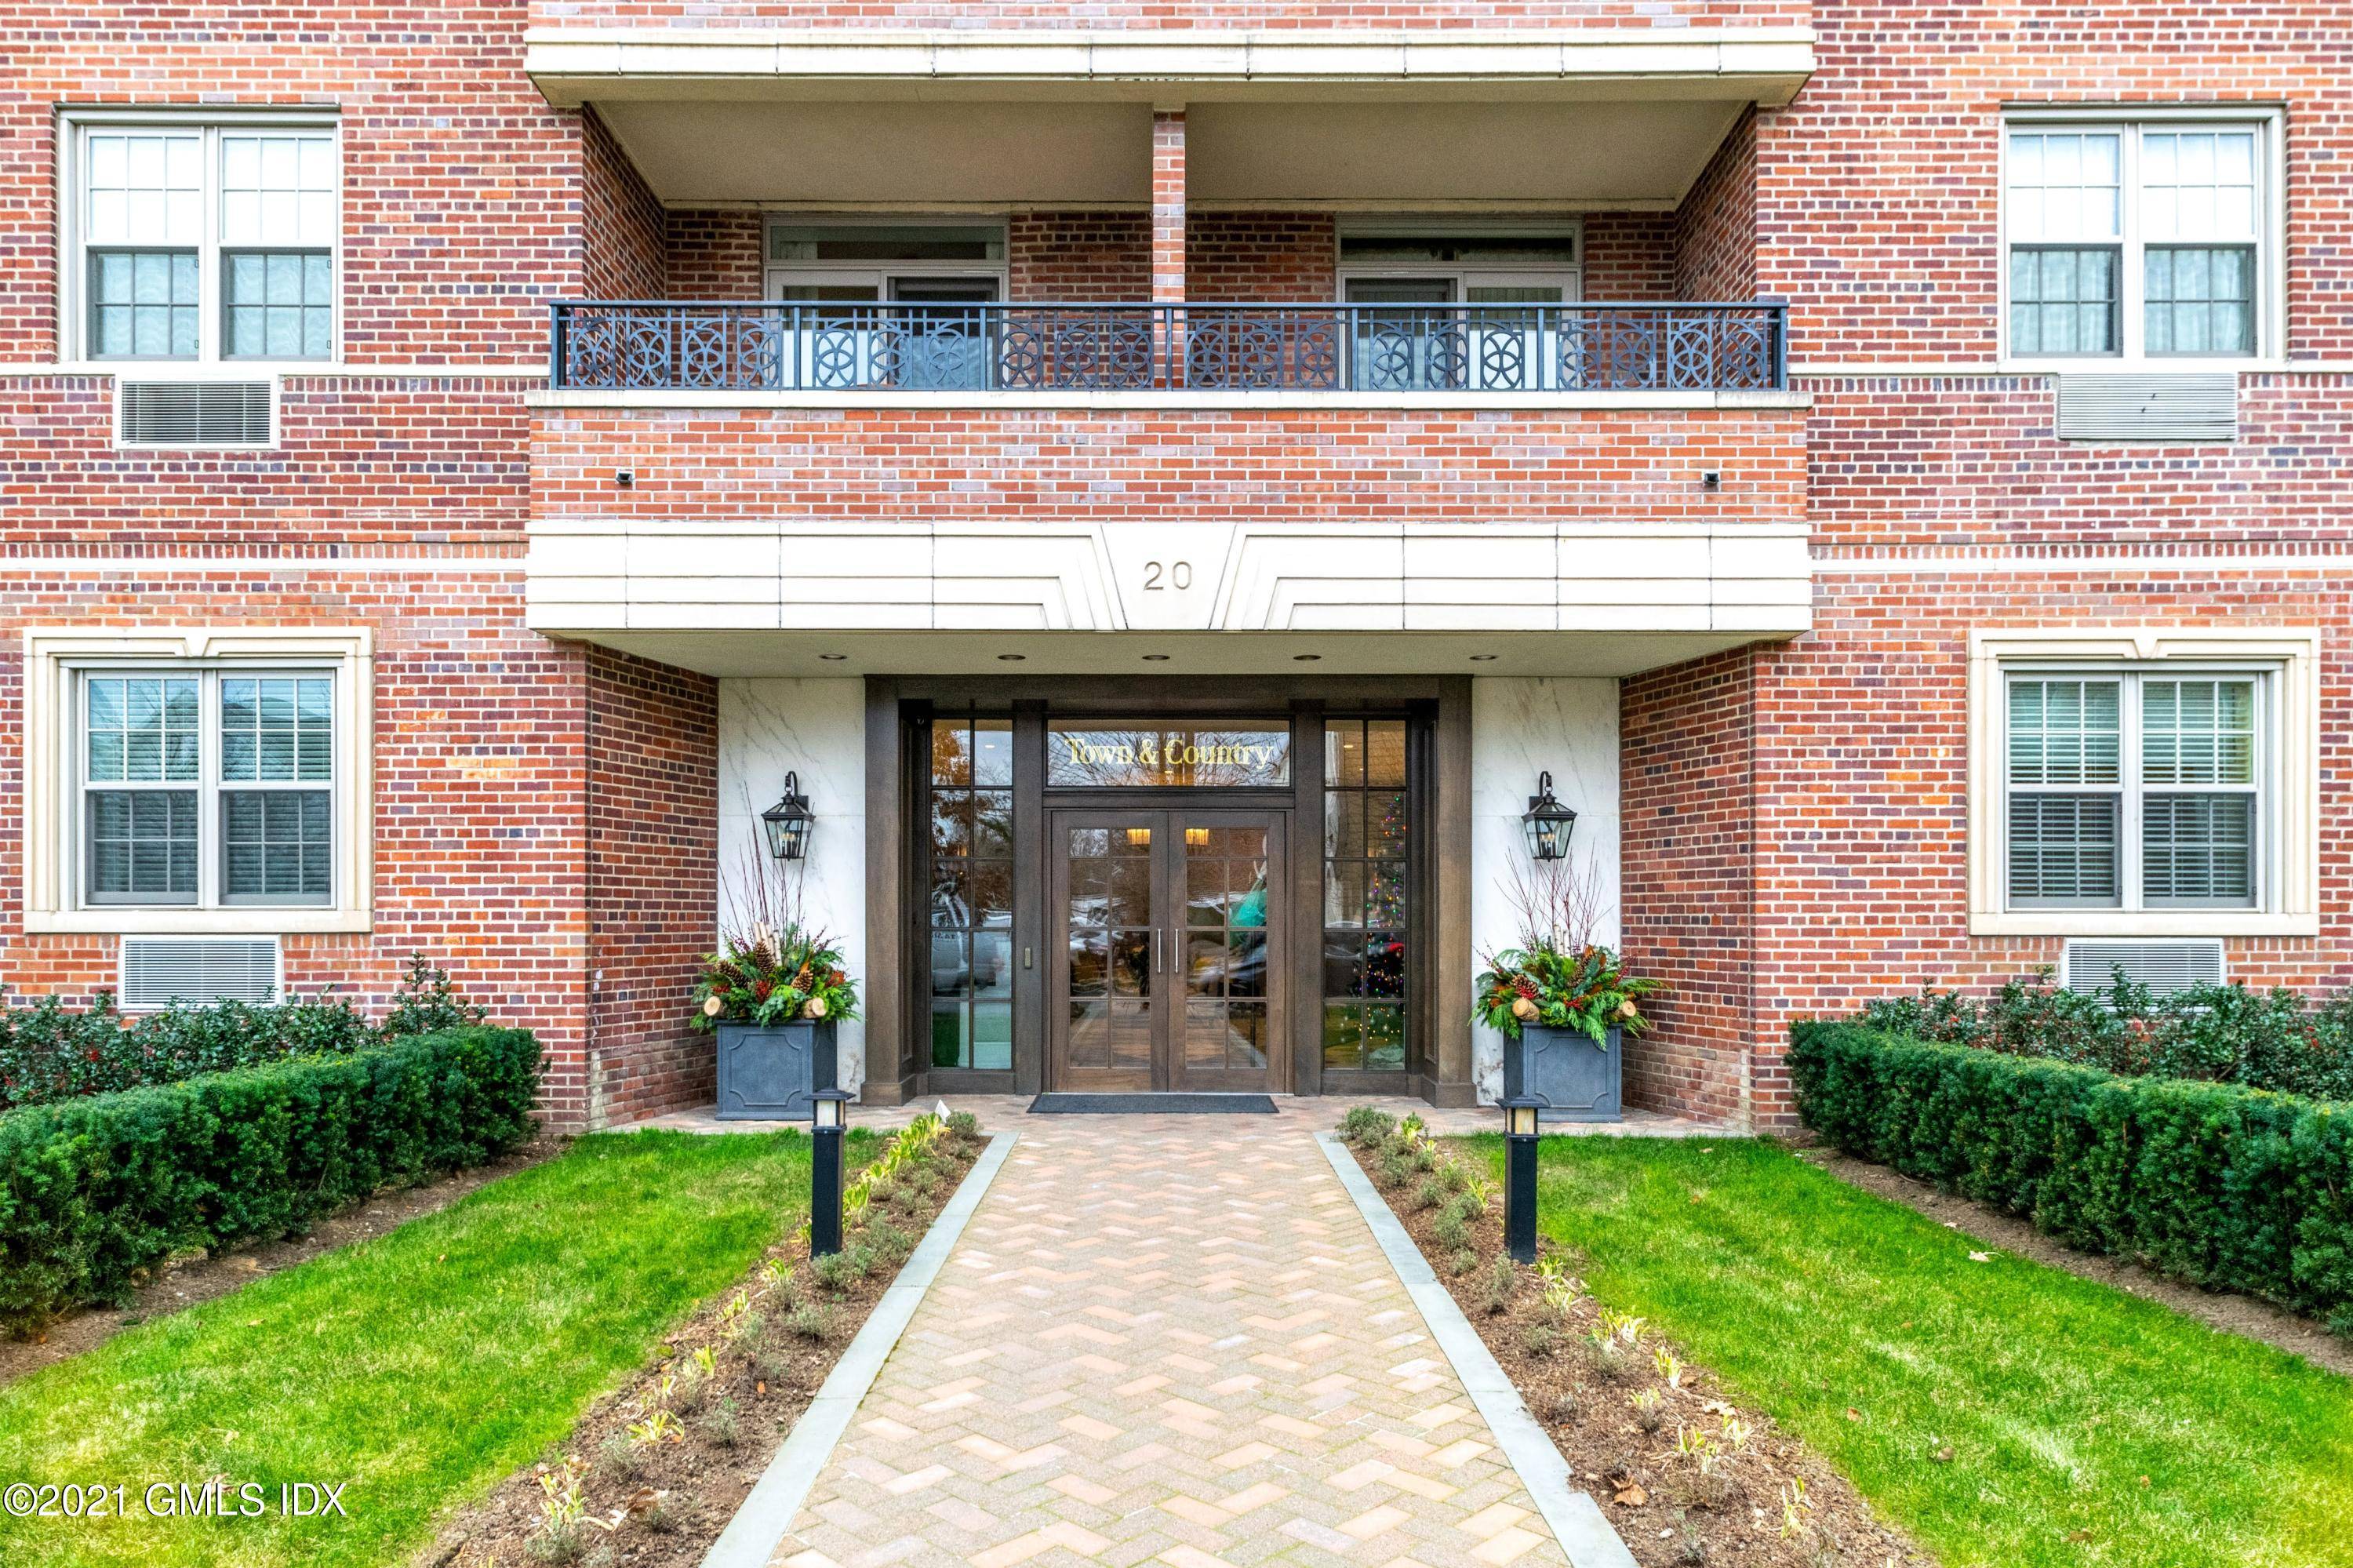 Luxury, carefree one level living awaits you in the sought after, centrally located Town Country Condominium just around the corner from all the shops, restaurants, boutiques and attractions downtown Greenwich ...